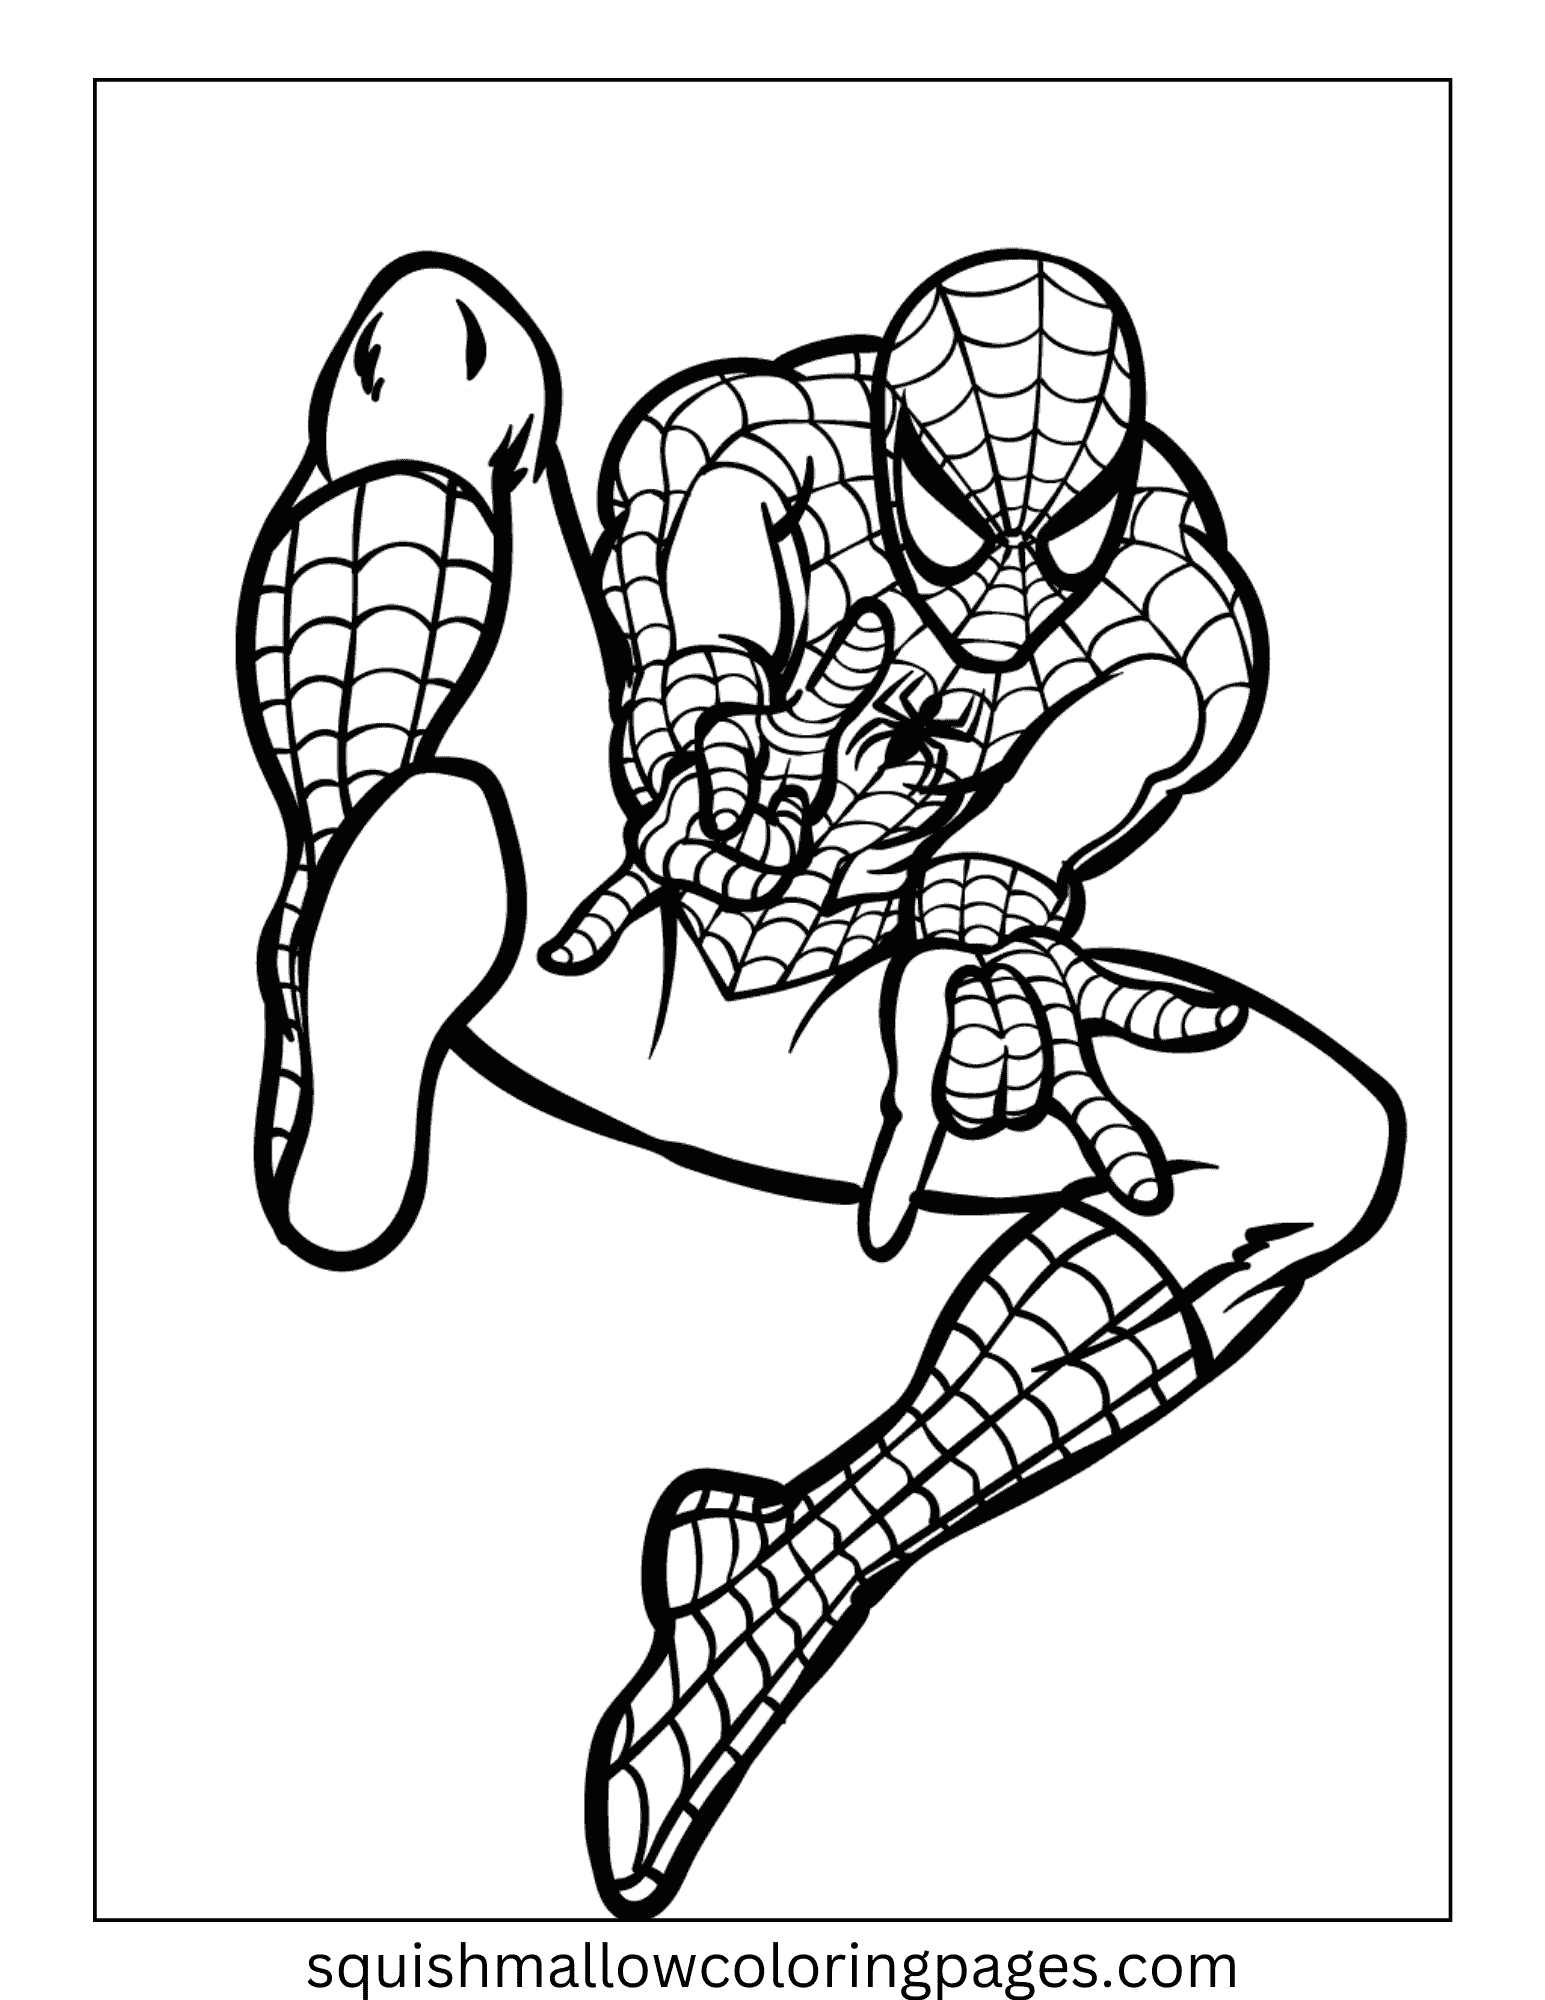 Web Action Spiderman Coloring Pages pdf